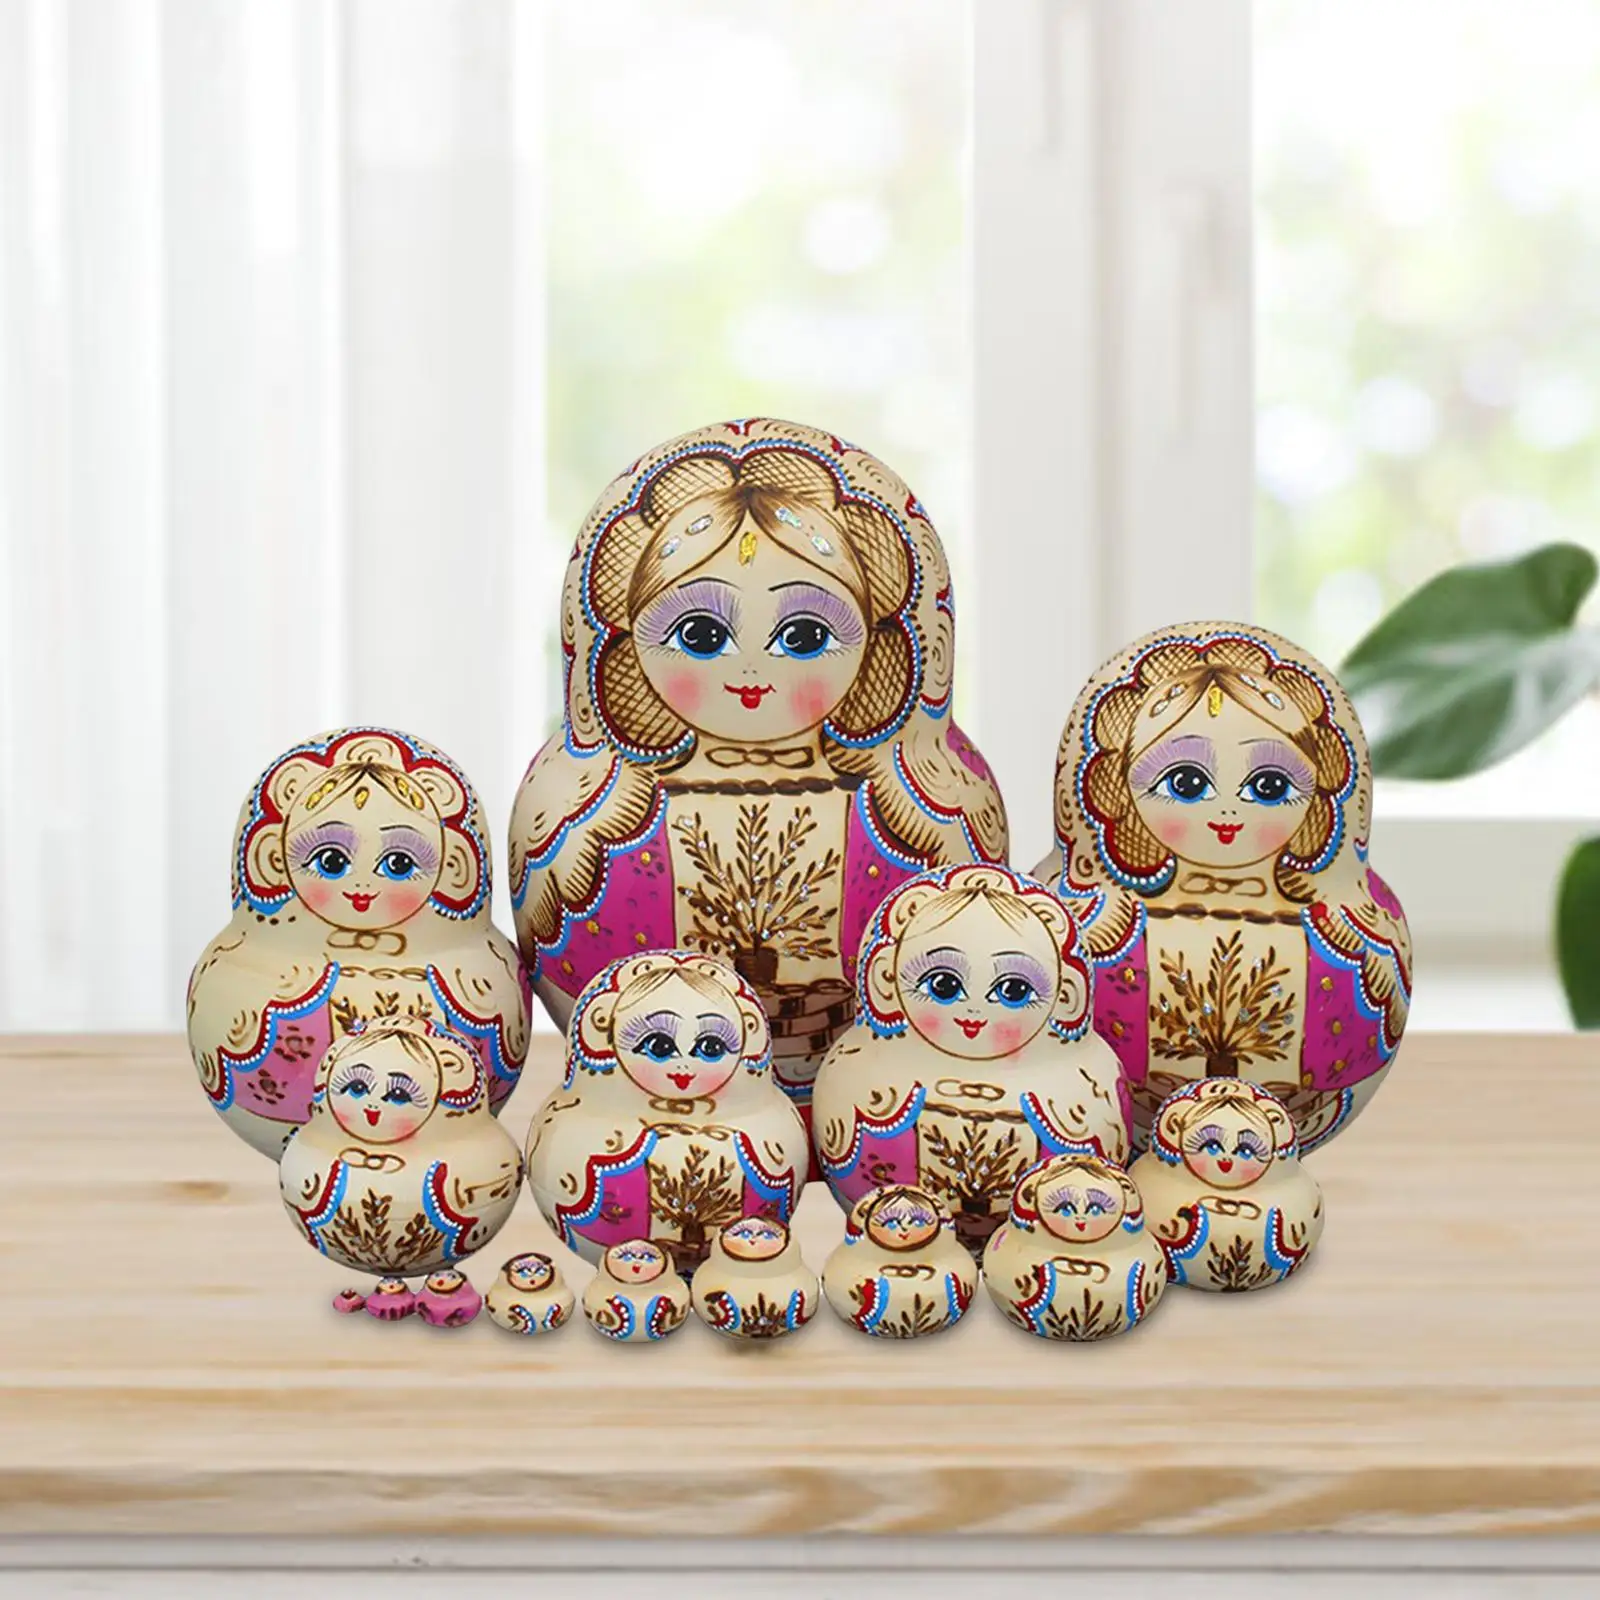 15Pcs Handmade Nesting Doll Ornament Figures Stackable Wooden Russian Nesting Doll for Birthday Office Table Halloween Adults